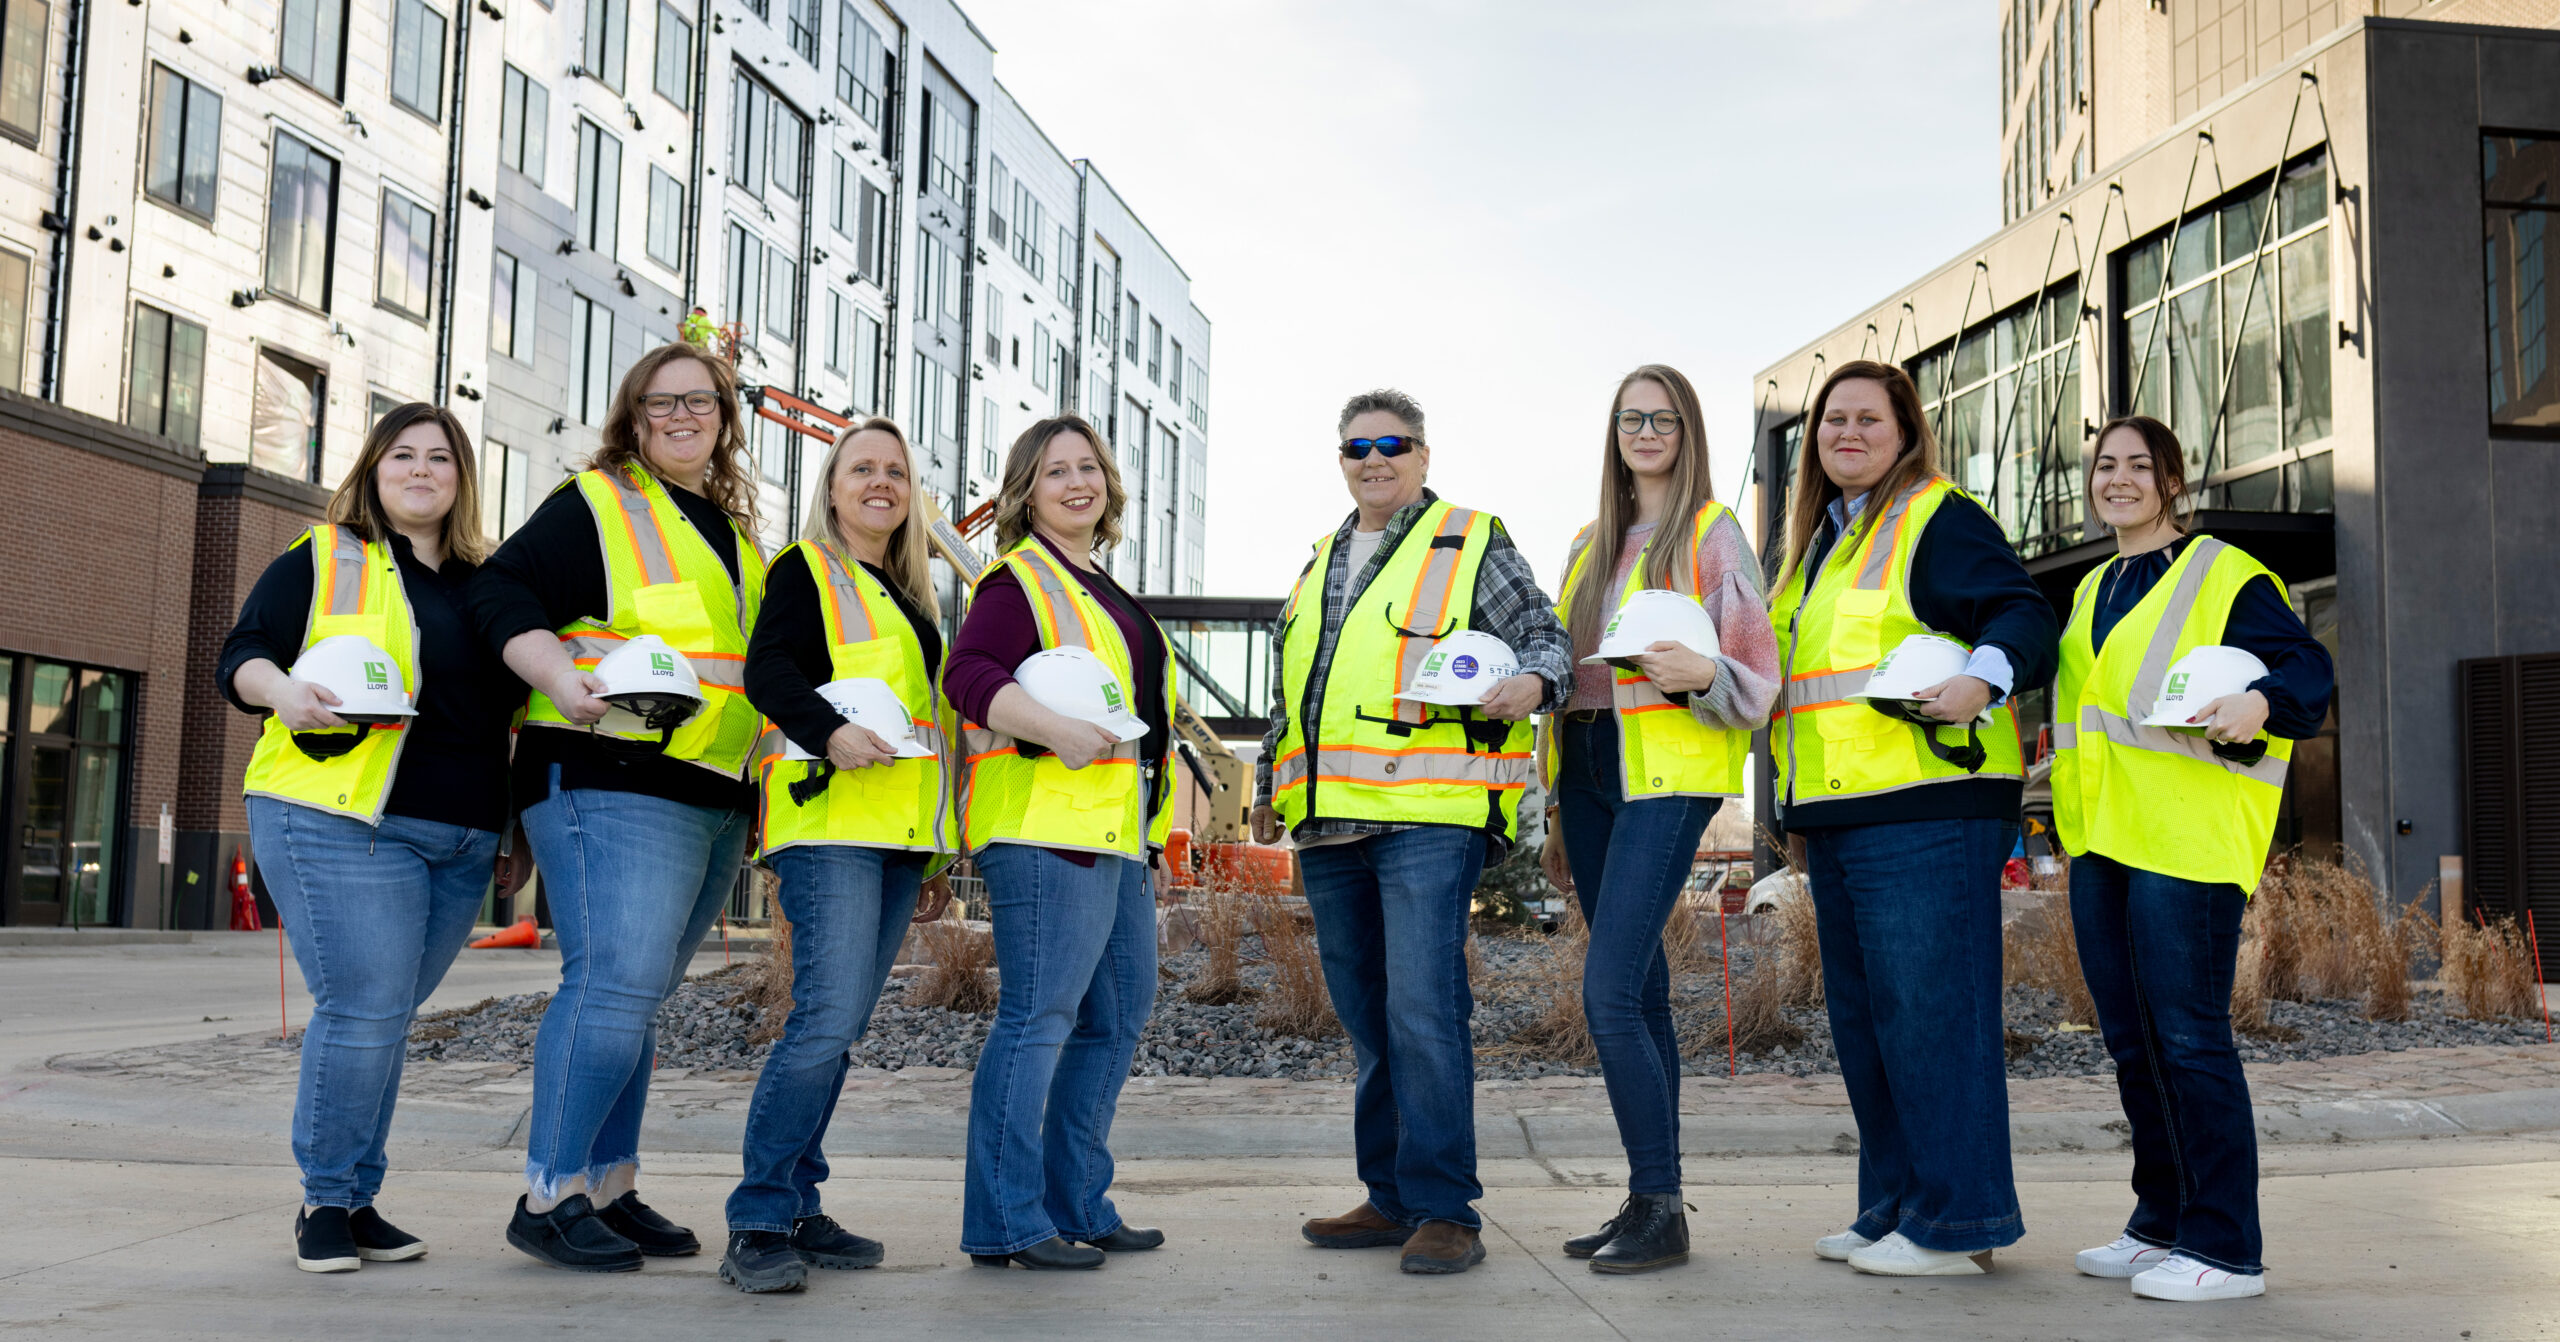 At Lloyd Companies, Women In Construction Are ‘Key To The Future’